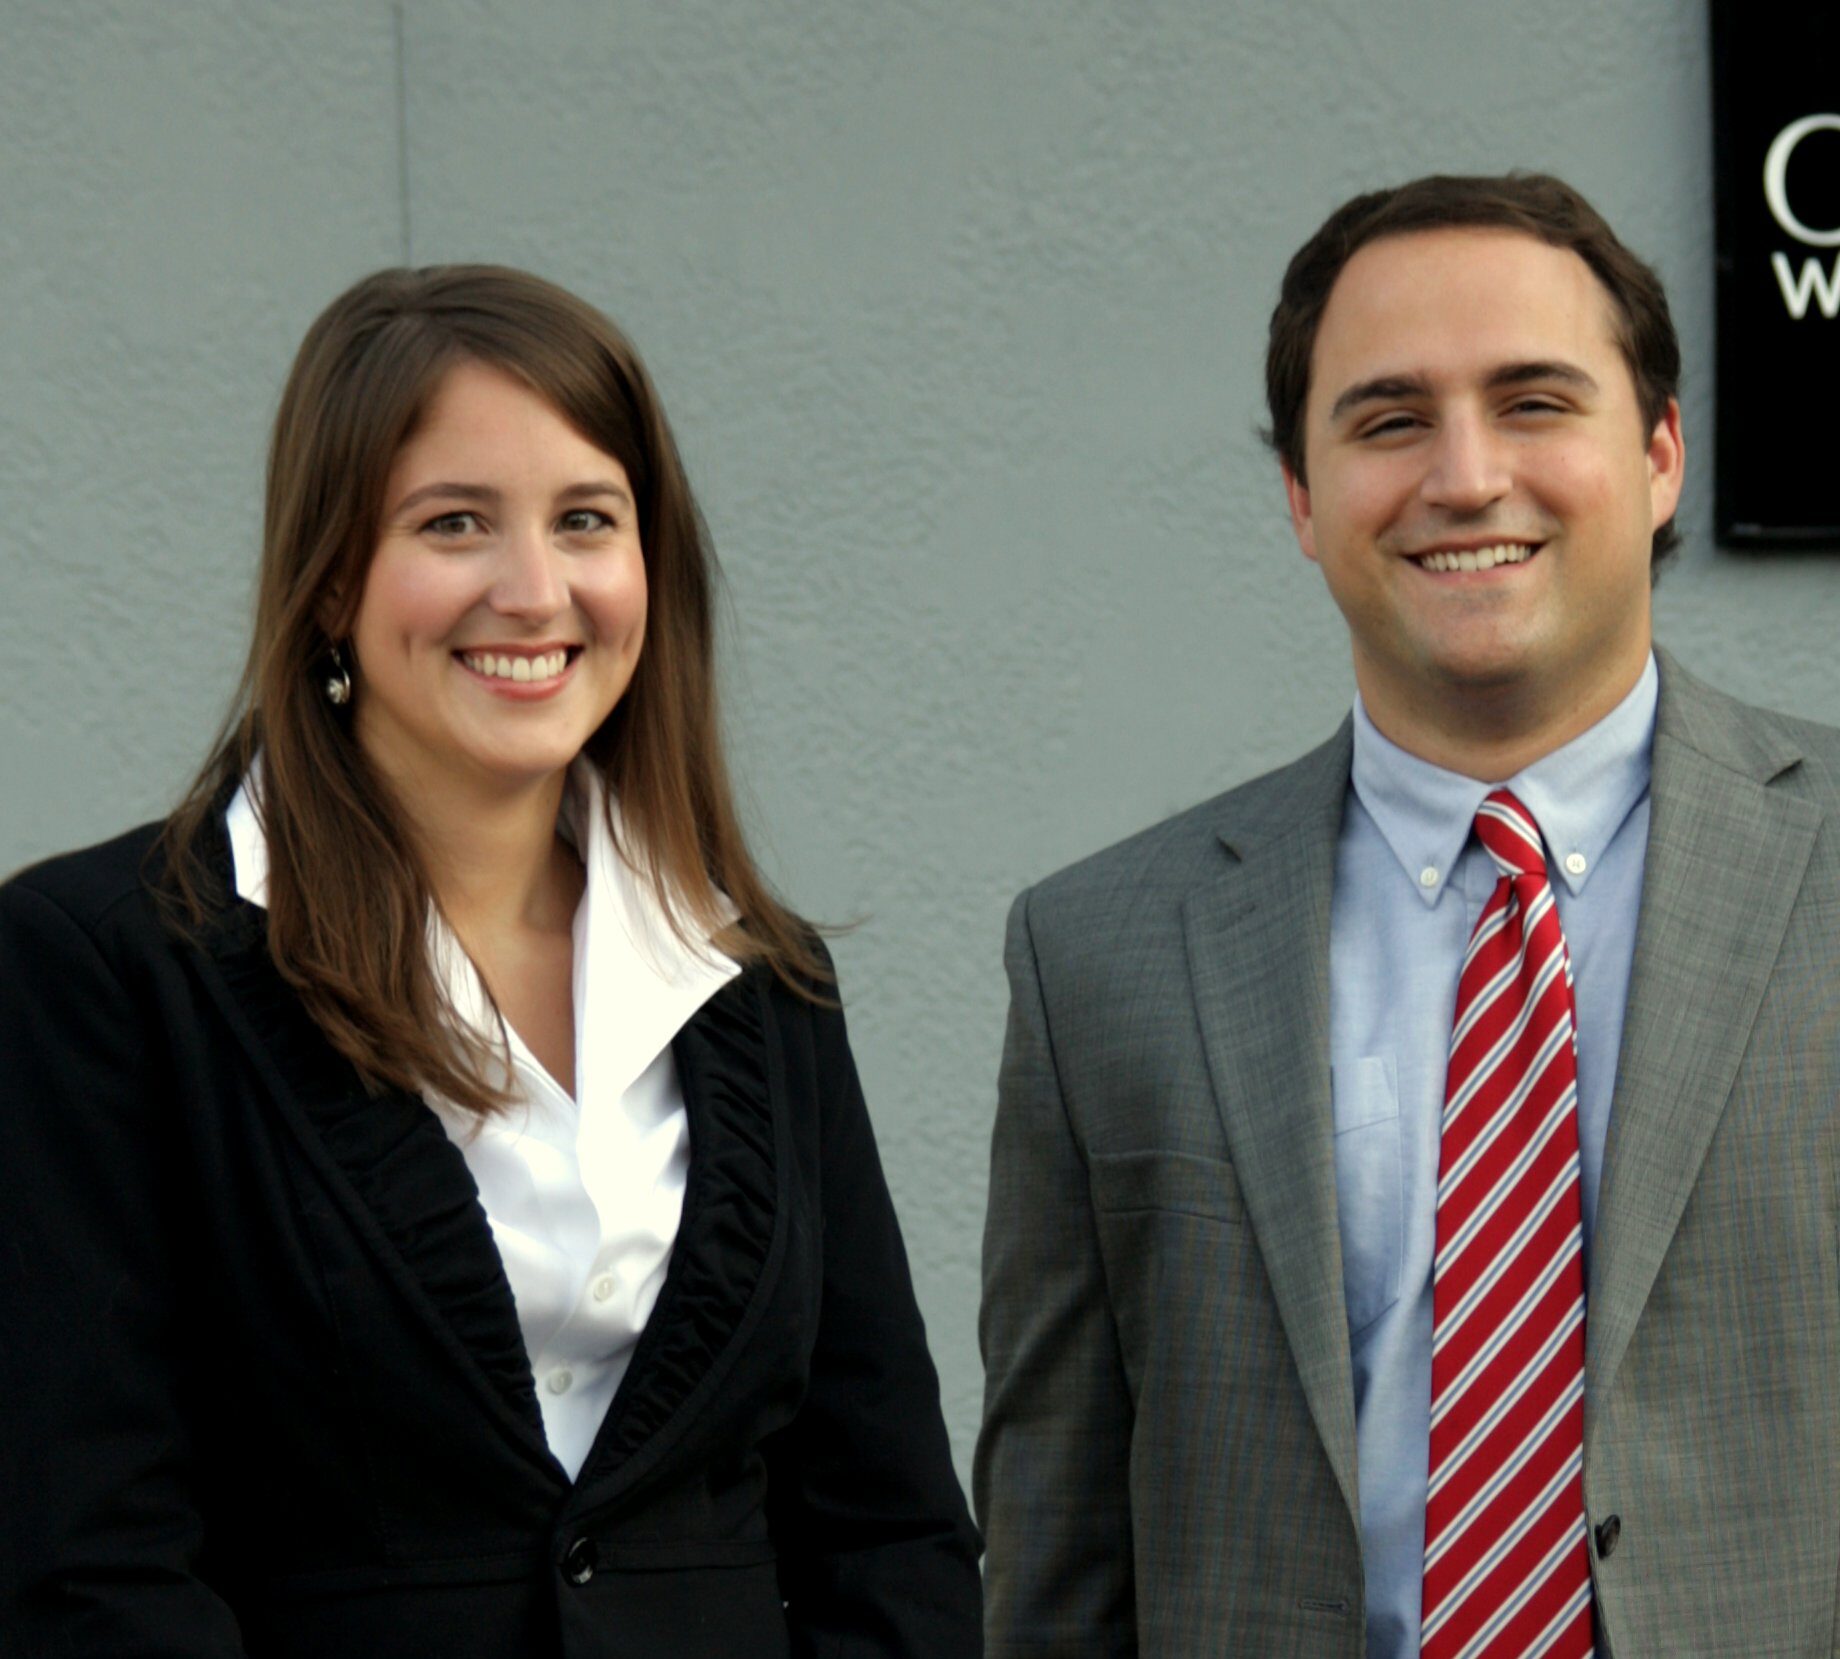 Alyssa & Adam (attorneys at law with Baxley Maniscalco) stand posing for a picture. Alyssa is wearing a white blouse with a black top, and Adam is wearing a grey blazer with a light blue top and a white and red tie.